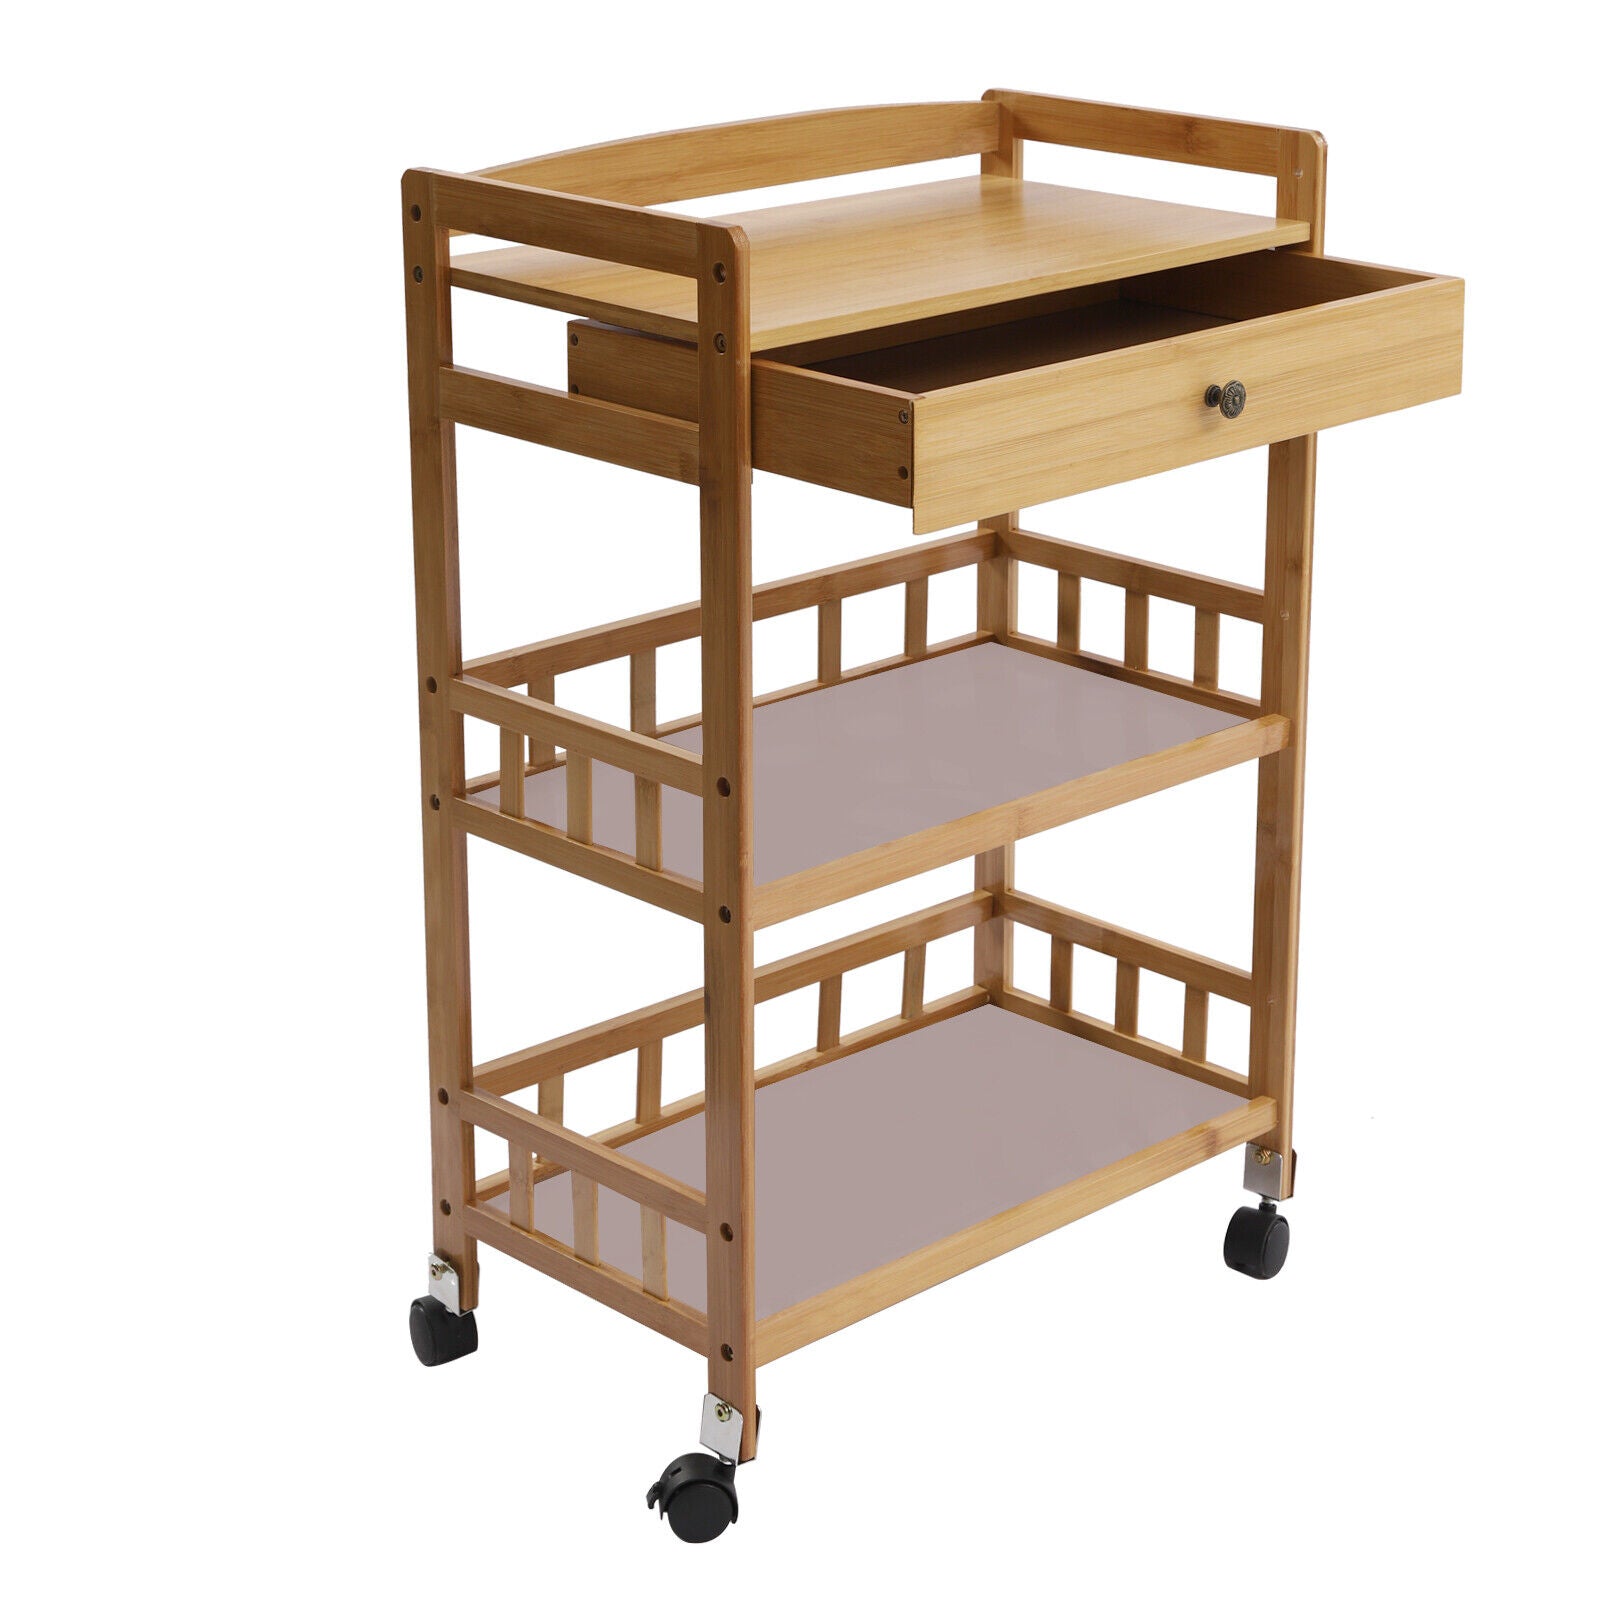 TFCFL Rolling Kitchen Cart 3 Tiers Bamboo Island Trolley Cart with Wheels and 1 Drawer